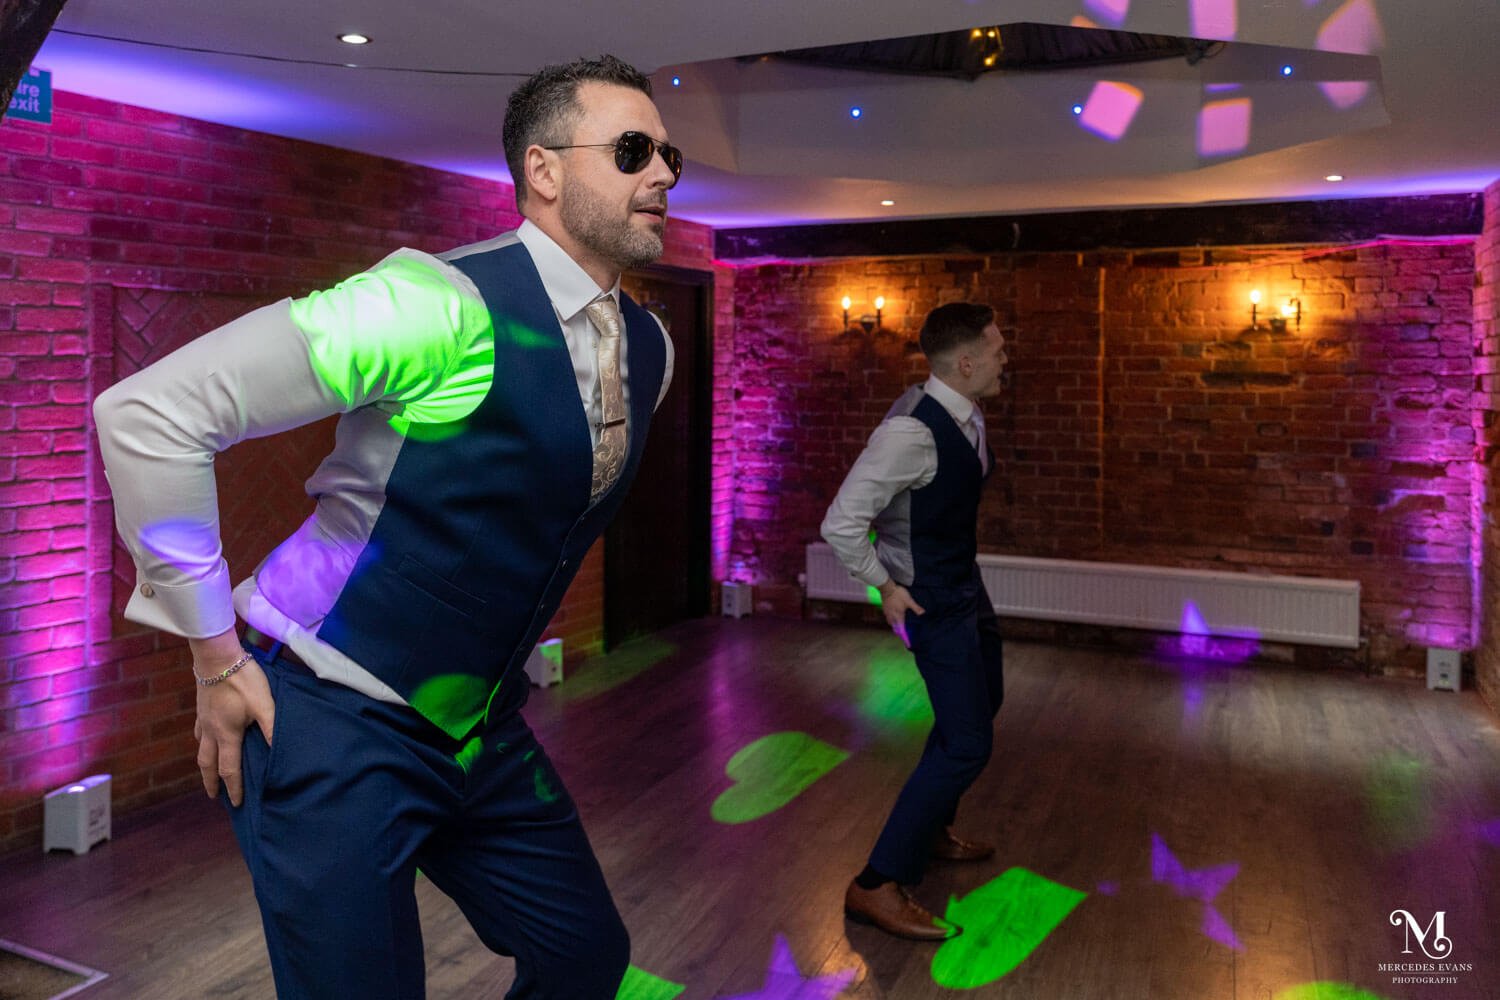 the groom and groomsmen do a co-ordinated dance on the dance floor with green and violet lights